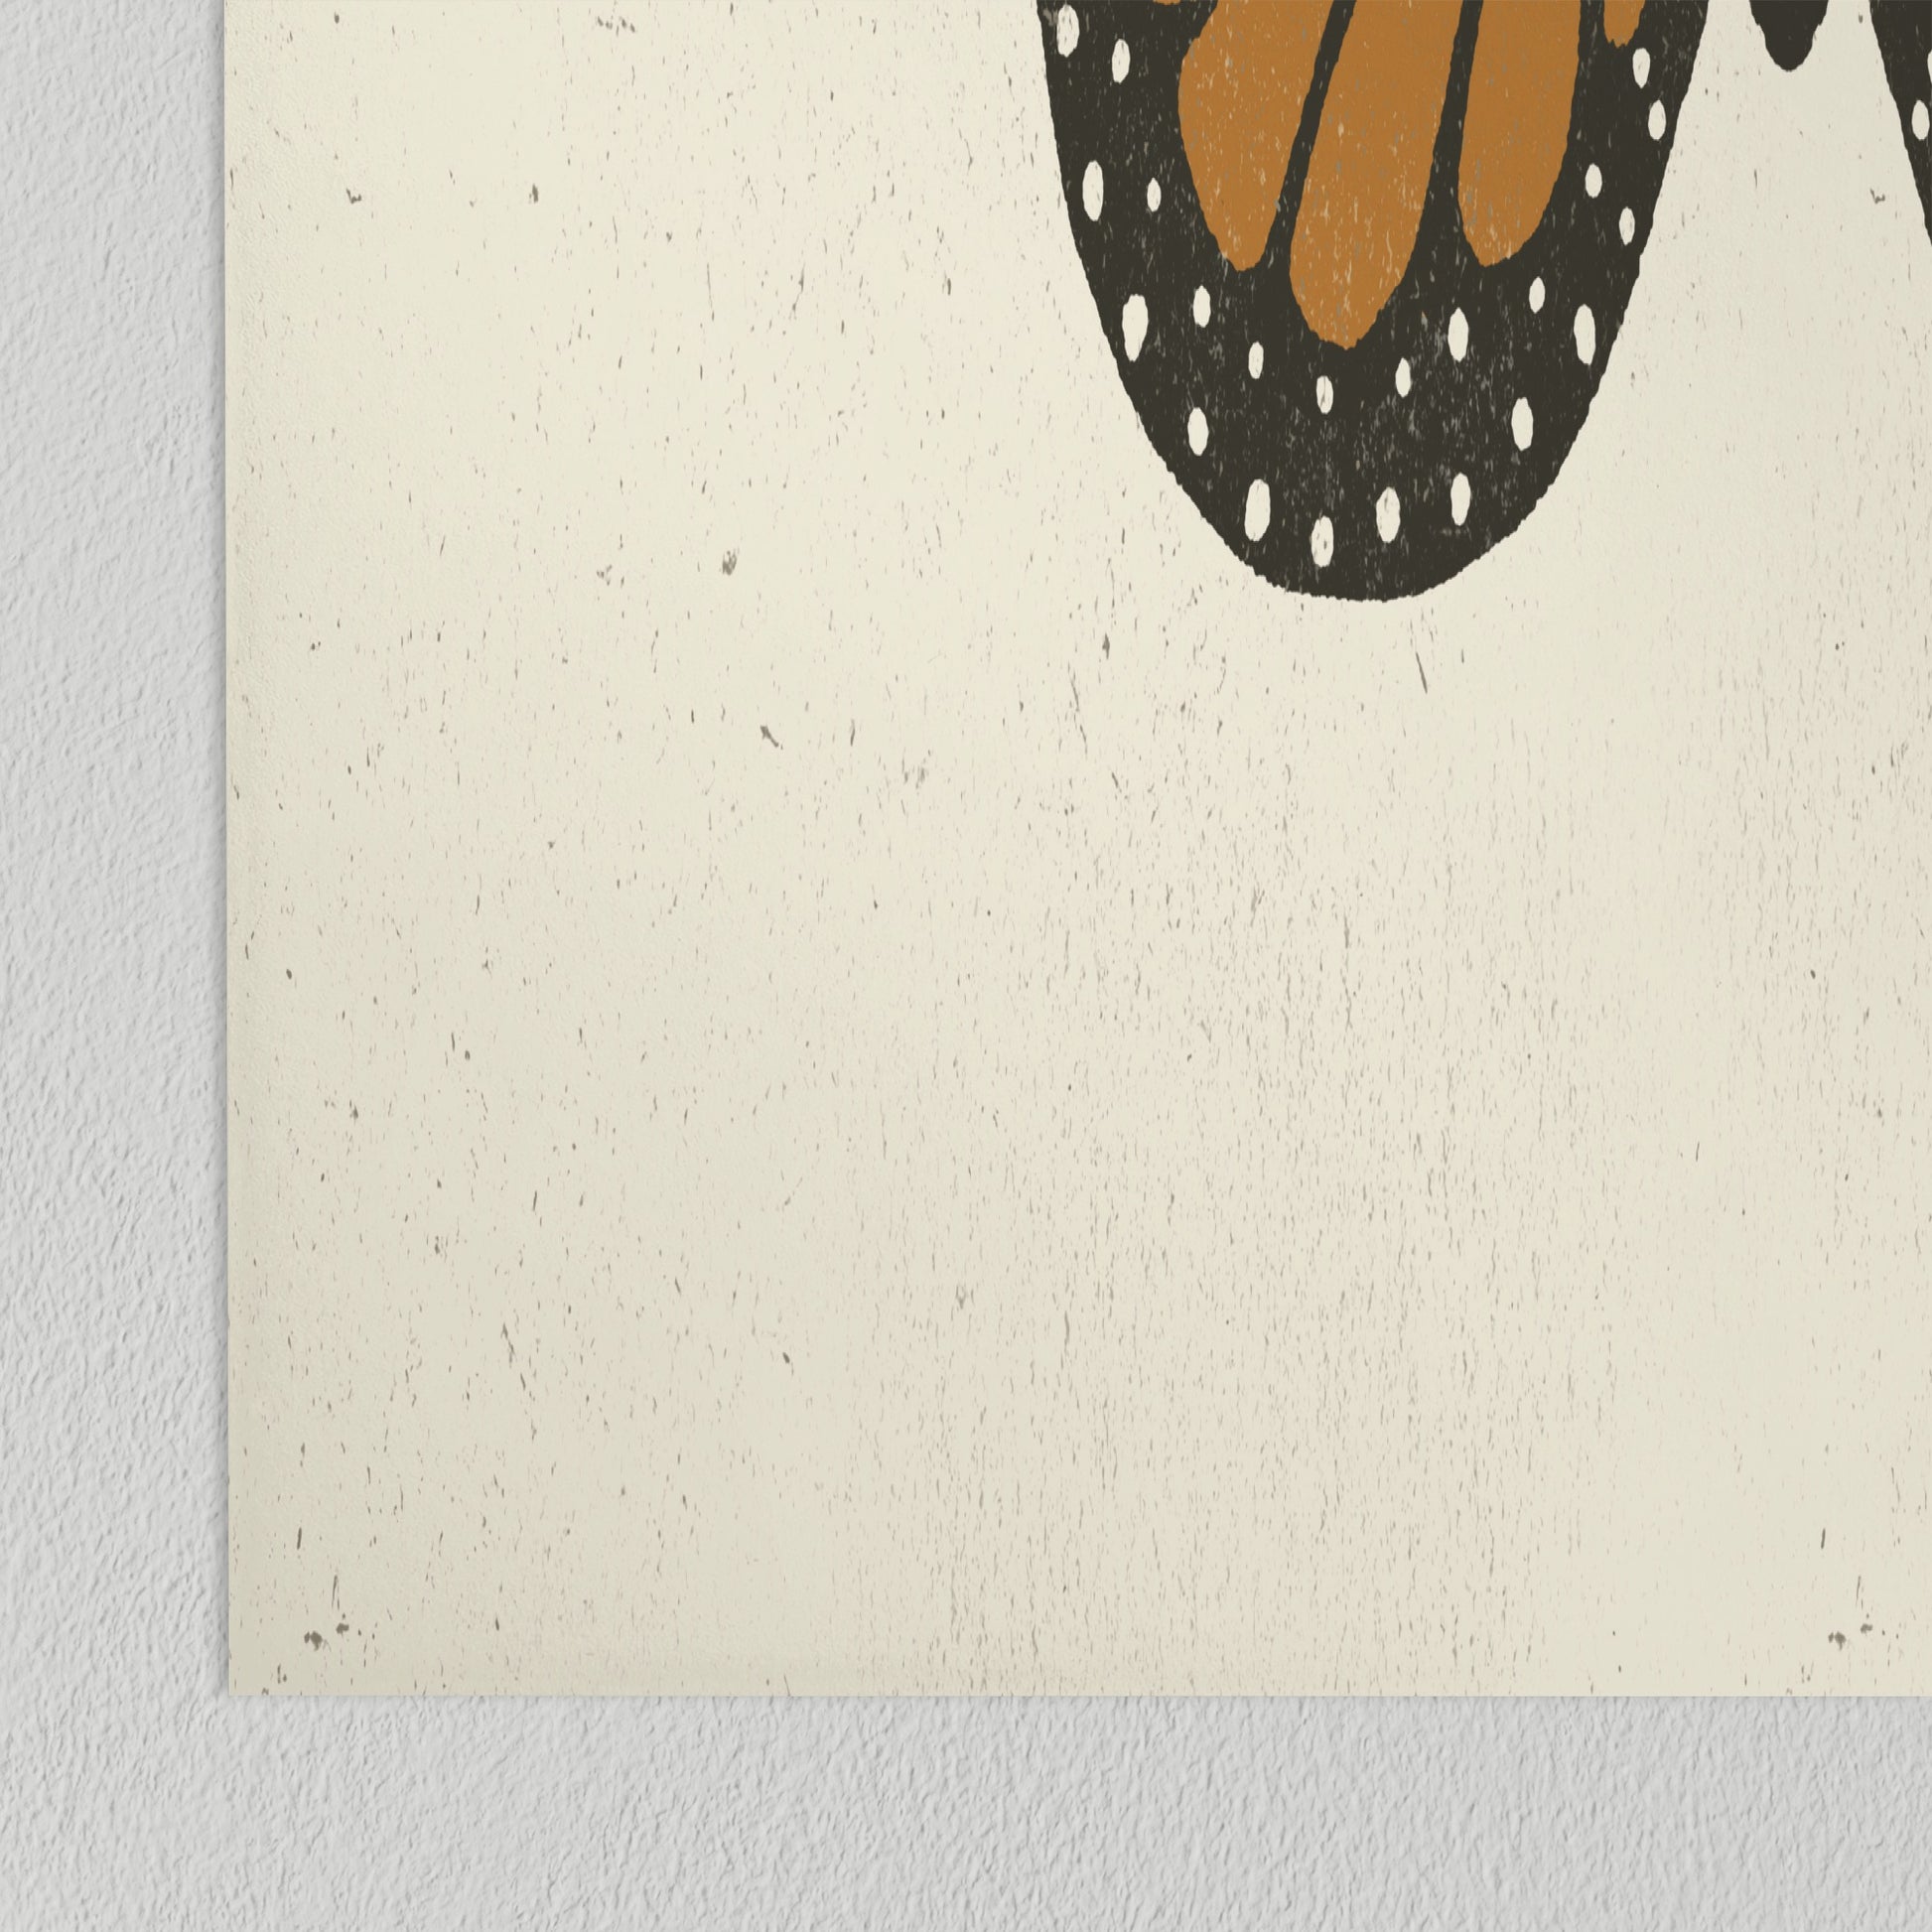 Monarch Butterfly by Pauline Stanley - Poster, Poster, 12" X 16"